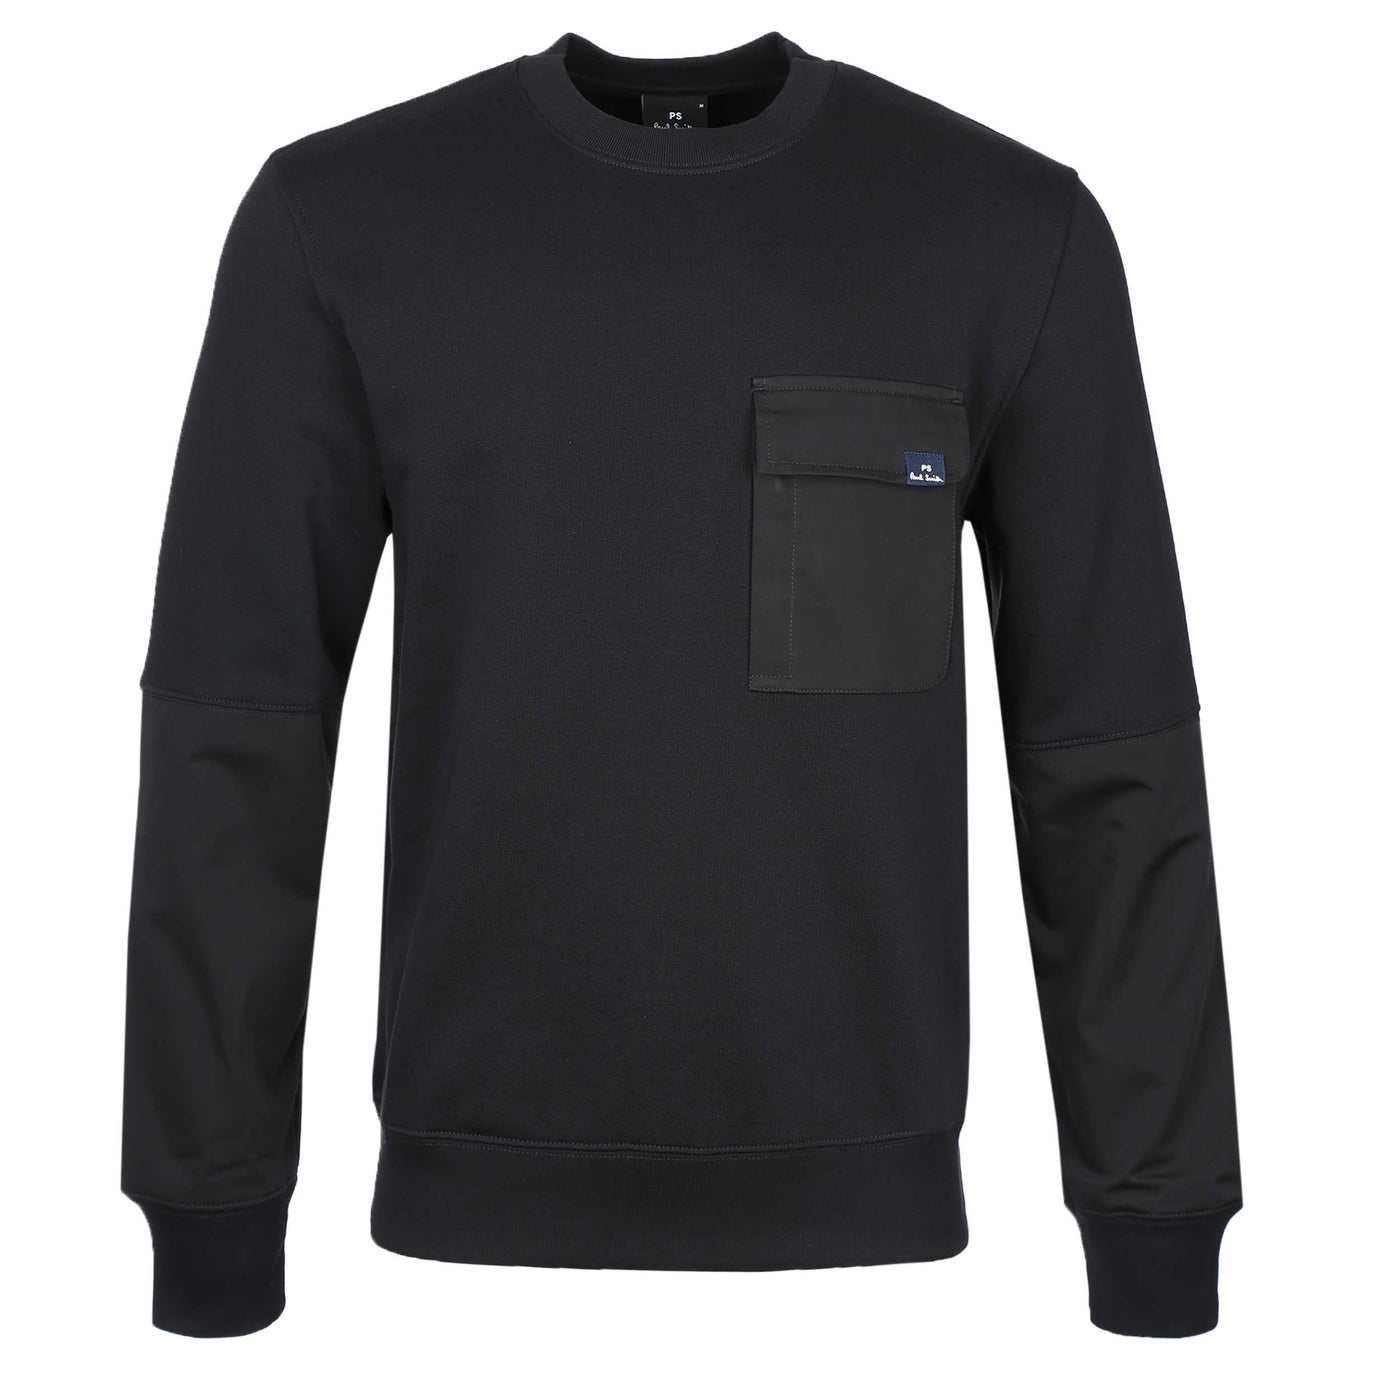 Paul Smith Chest Pocket Sweat Top in Black